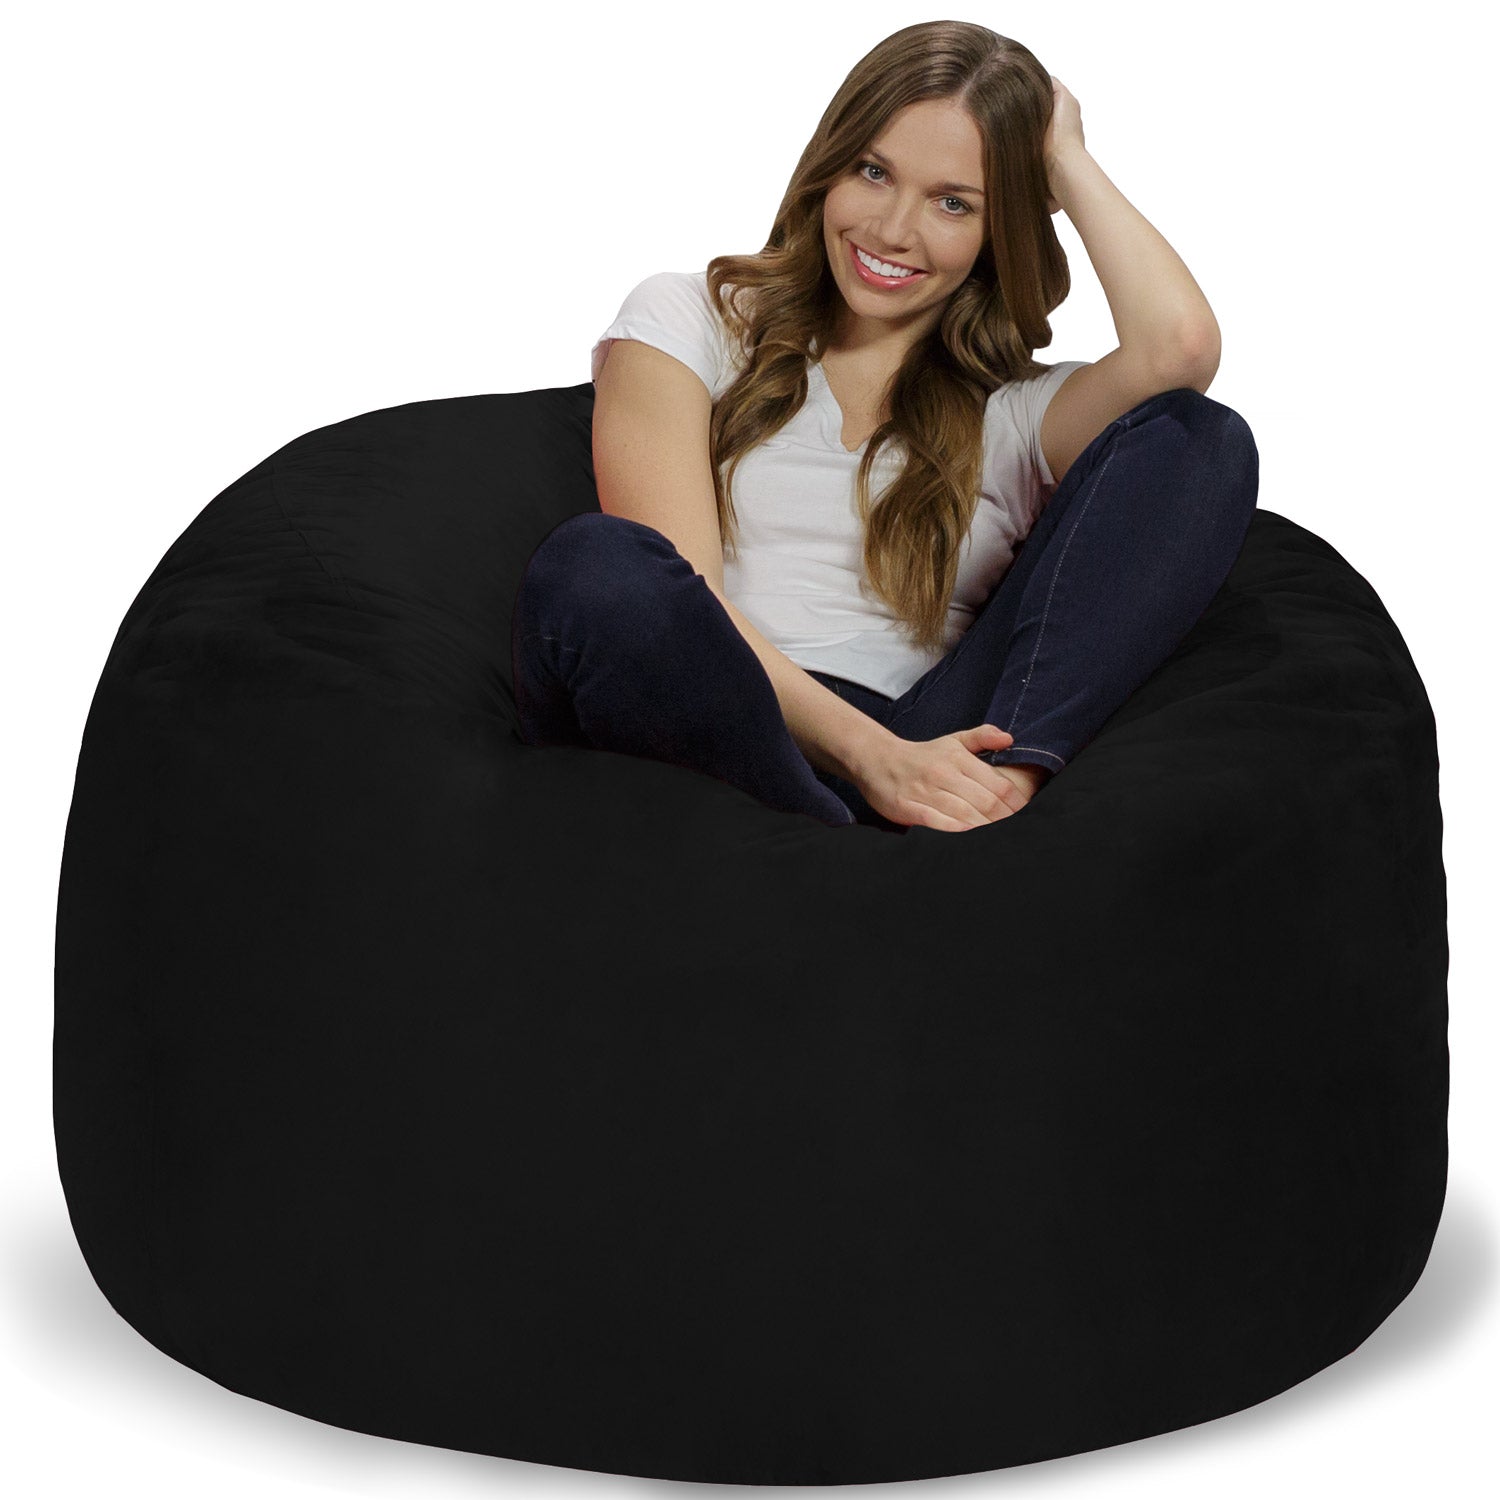 5' Large Bean Bag Chair with Memory Foam Filling and Washable Cover  Charcoal - Relax Sacks